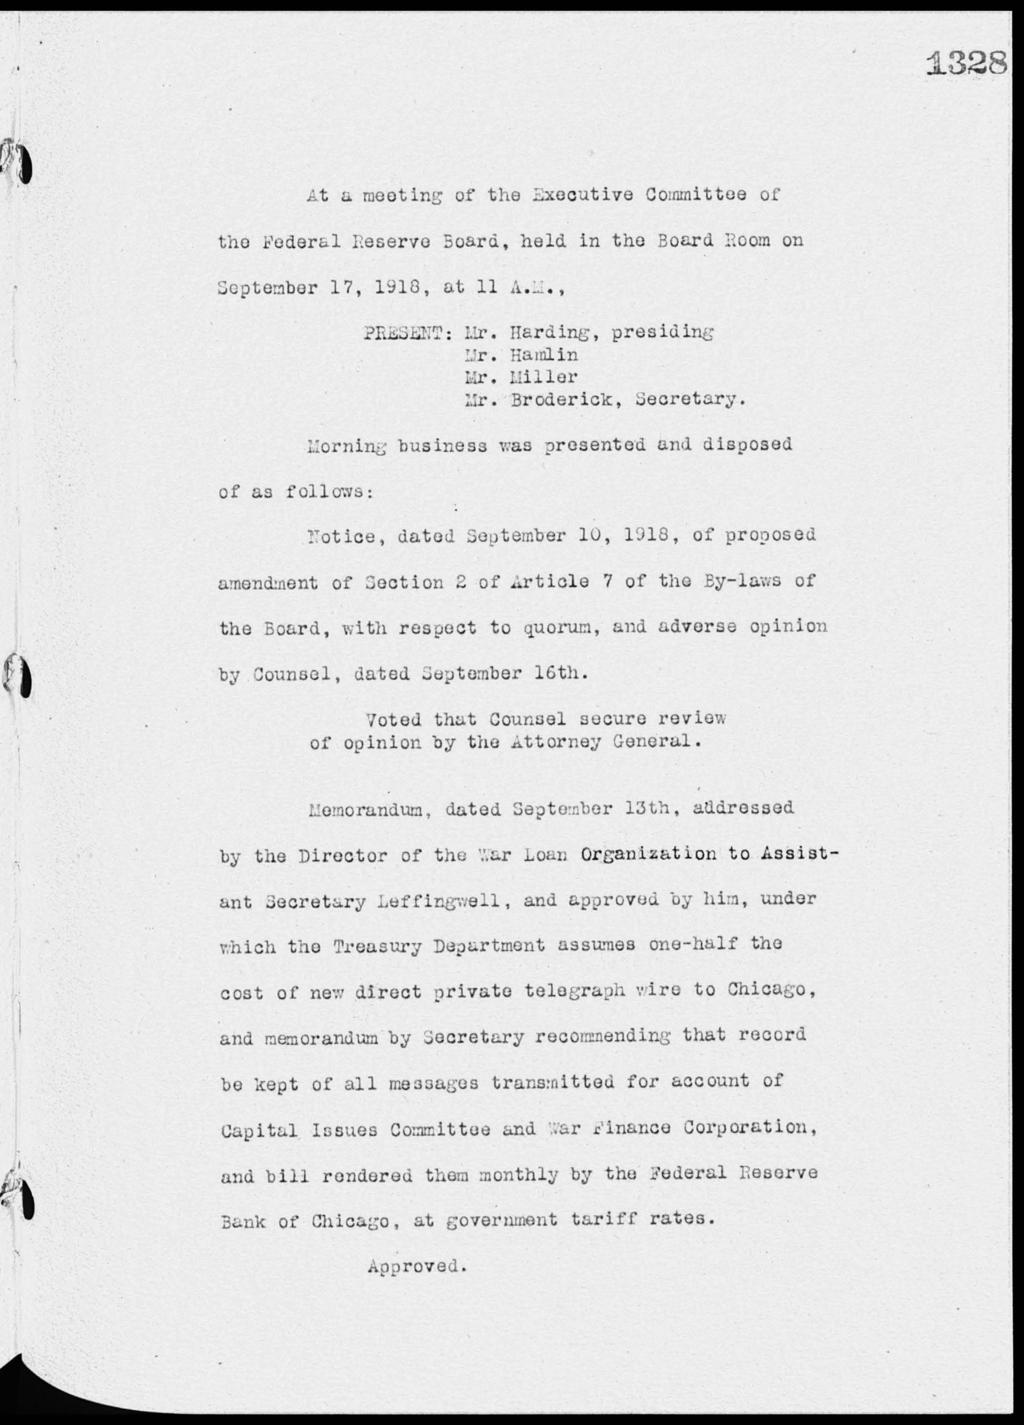 1328 Lt a meeting of the Lxecutive Committee of the Federal Eeserve Board, held in the Board 1Wom on September 17, 1918, at 11 of as follows: 211i.SLET: hr. Harding, presiding Hamlin Liner La'.